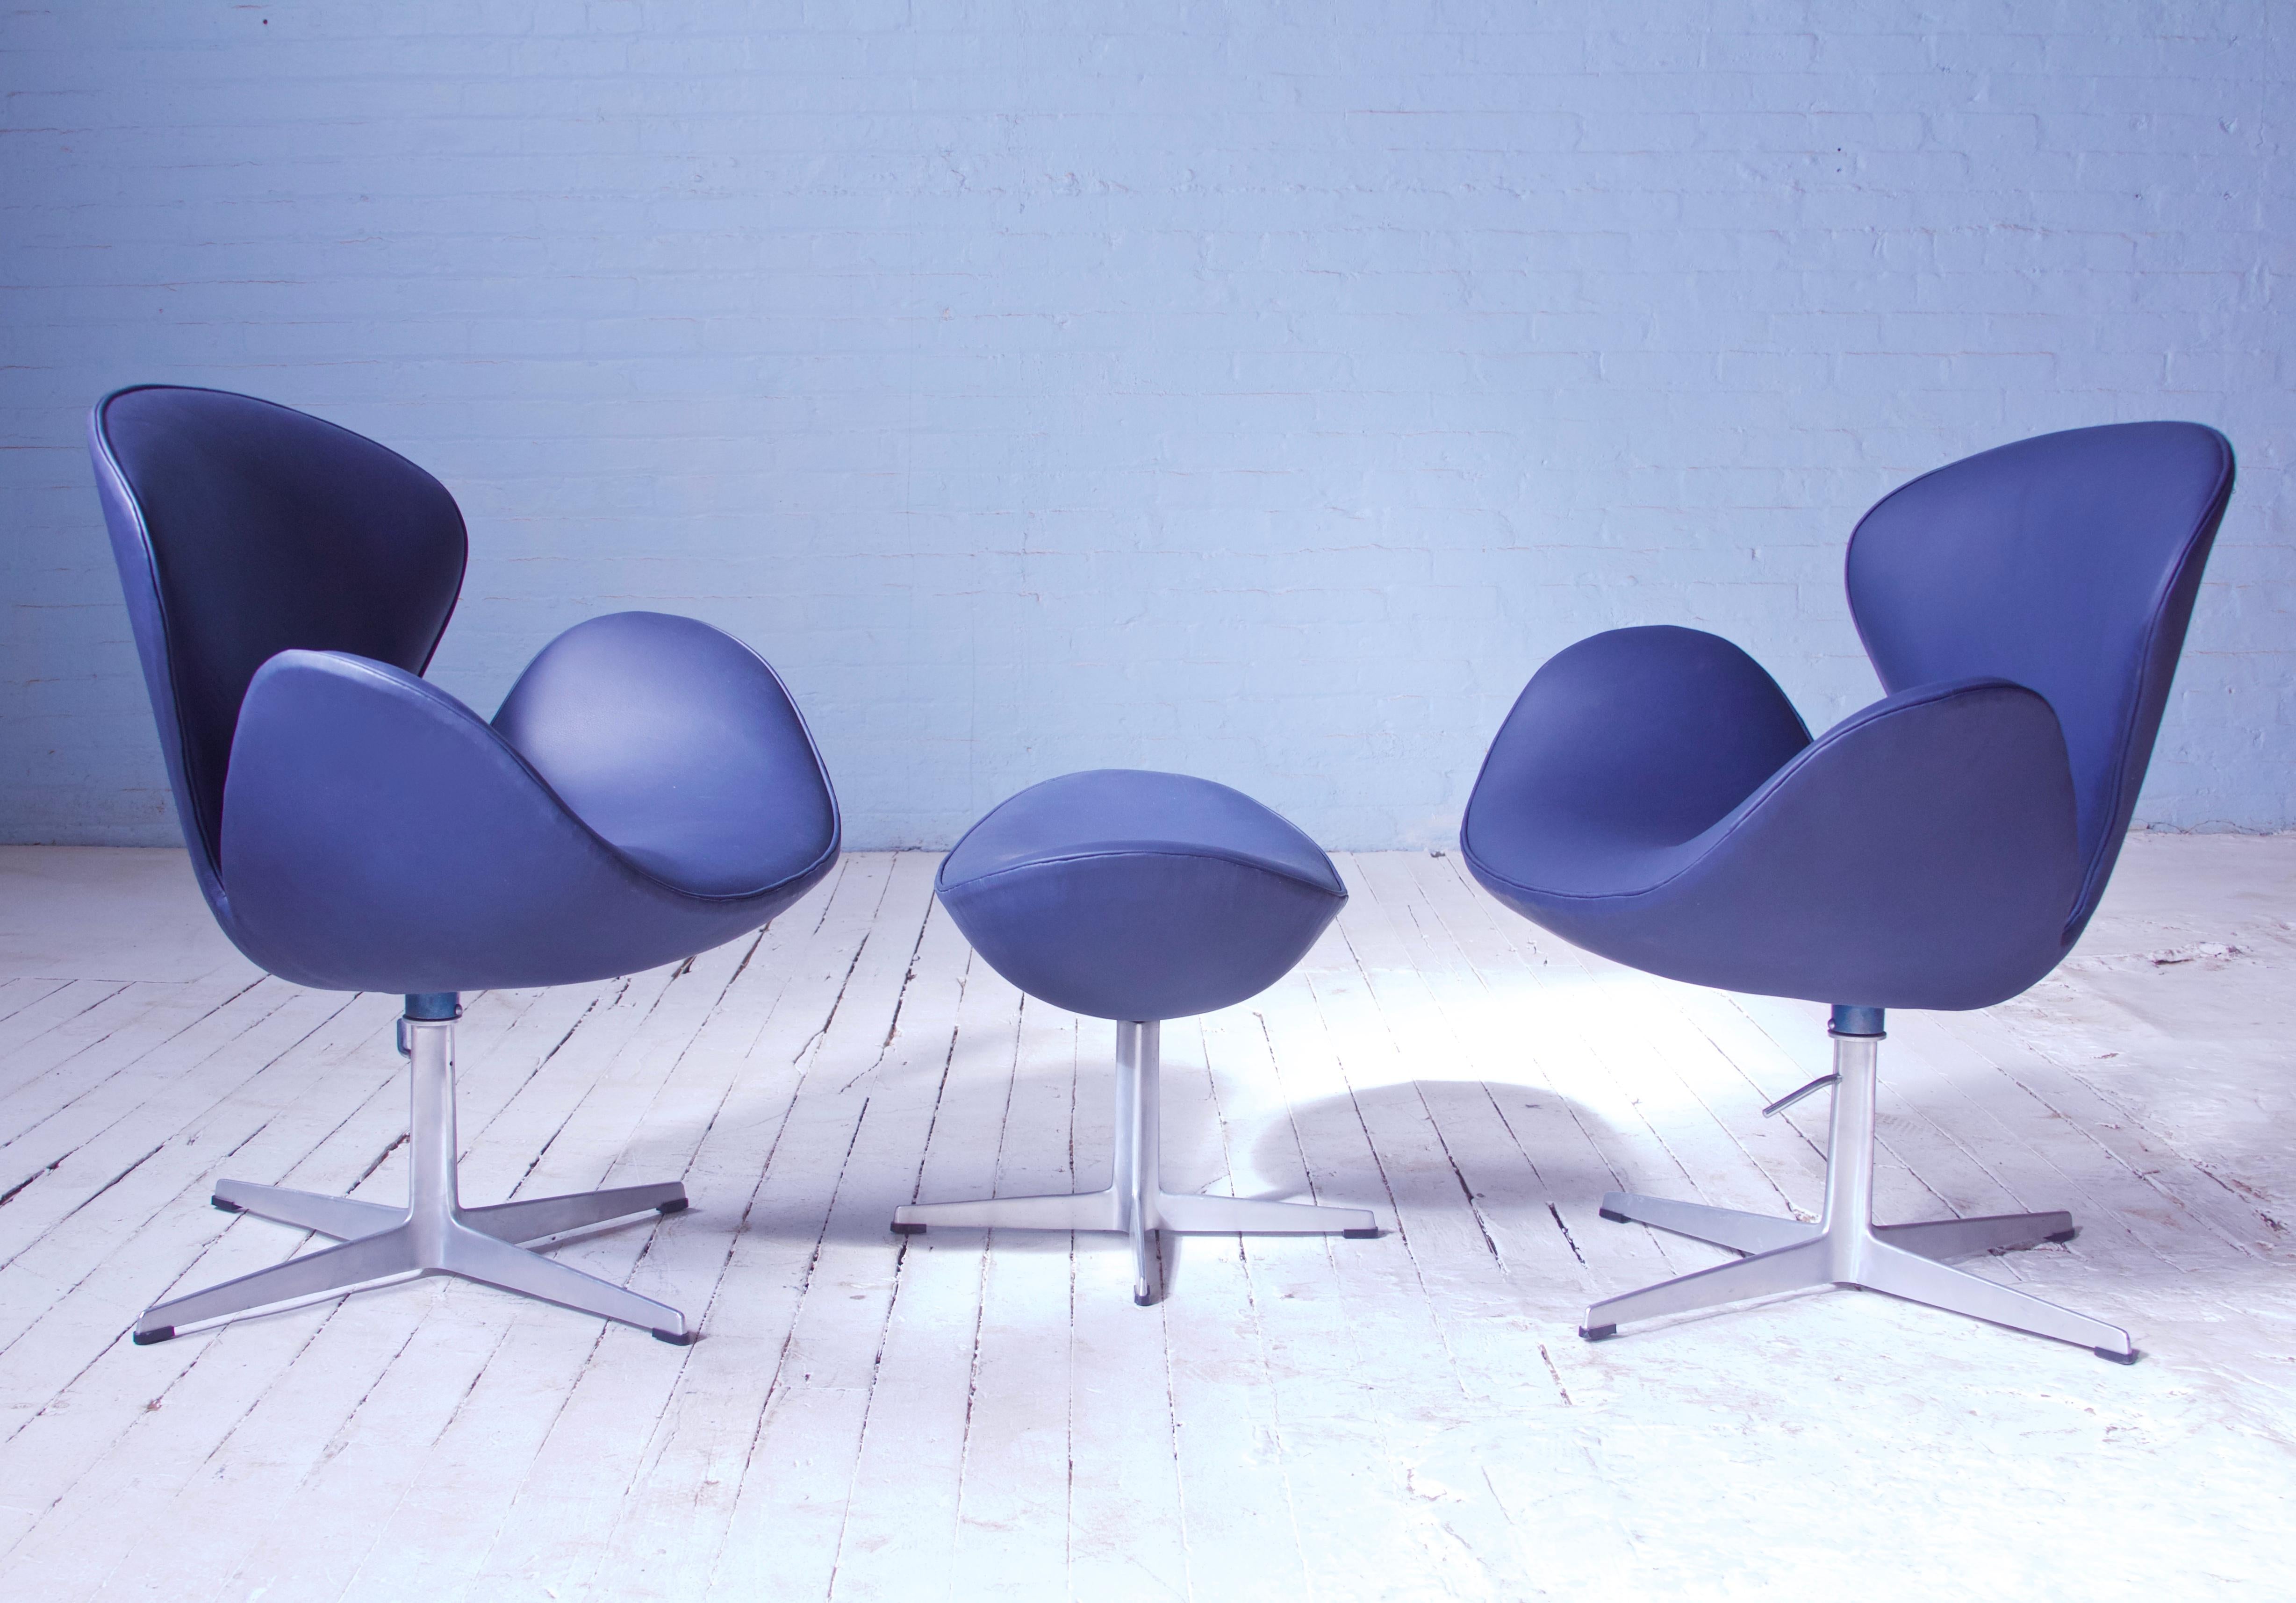 Single Chair still available*

Arne Jacobsen designed the Swan as well as the Egg for the lobby and lounge areas at the SAS Royal Hotel in Copenhagen, in 1958. The commission to design every element of the hotel building as well as the furniture was